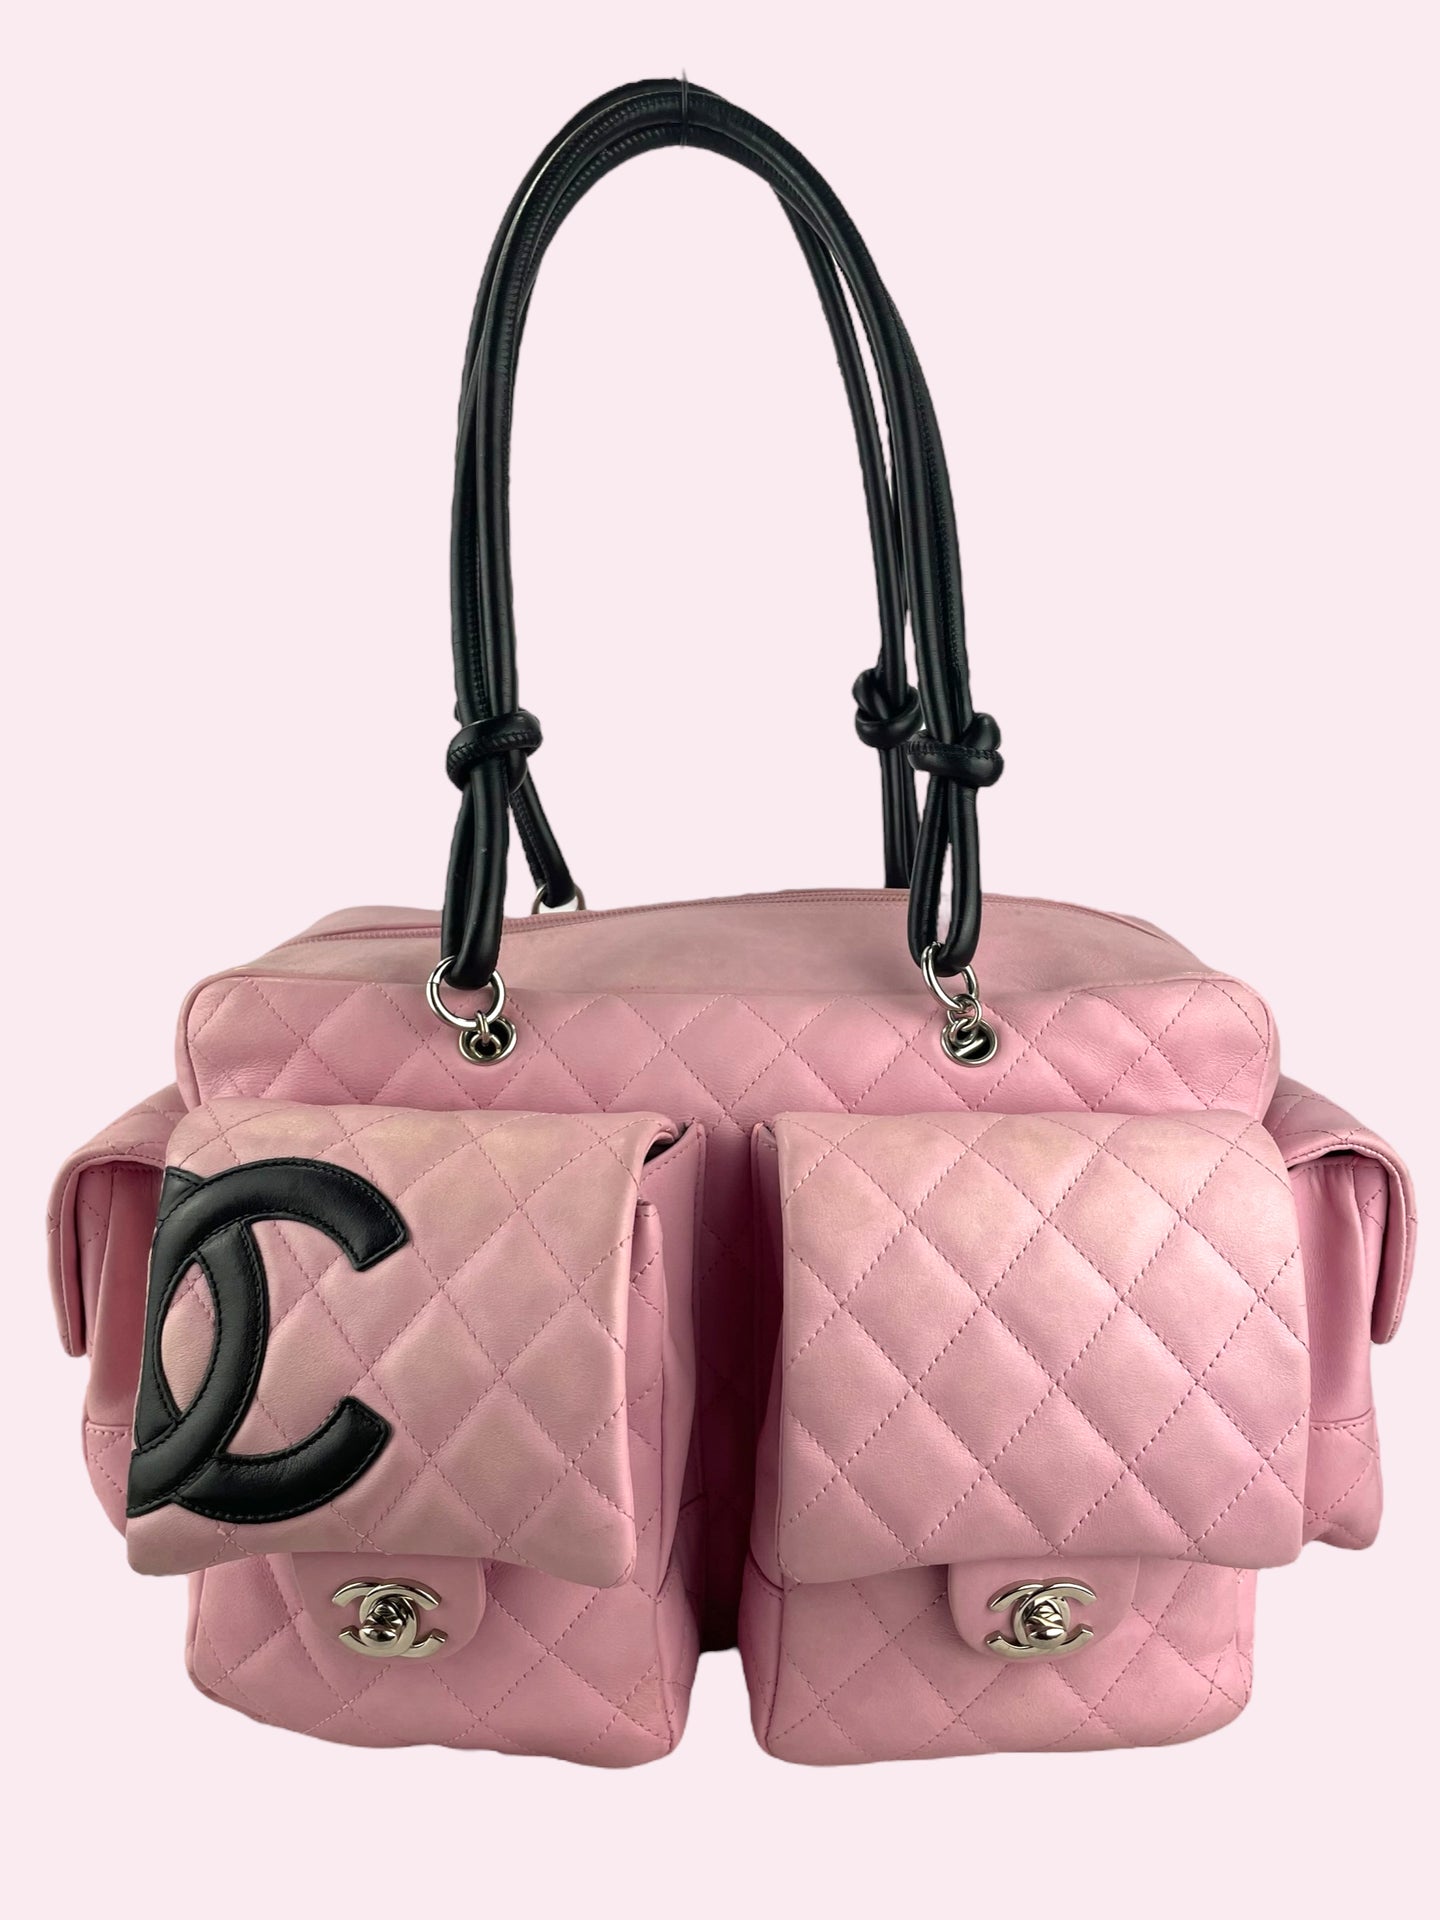 CHANEL CAMBON REPORTER PINK